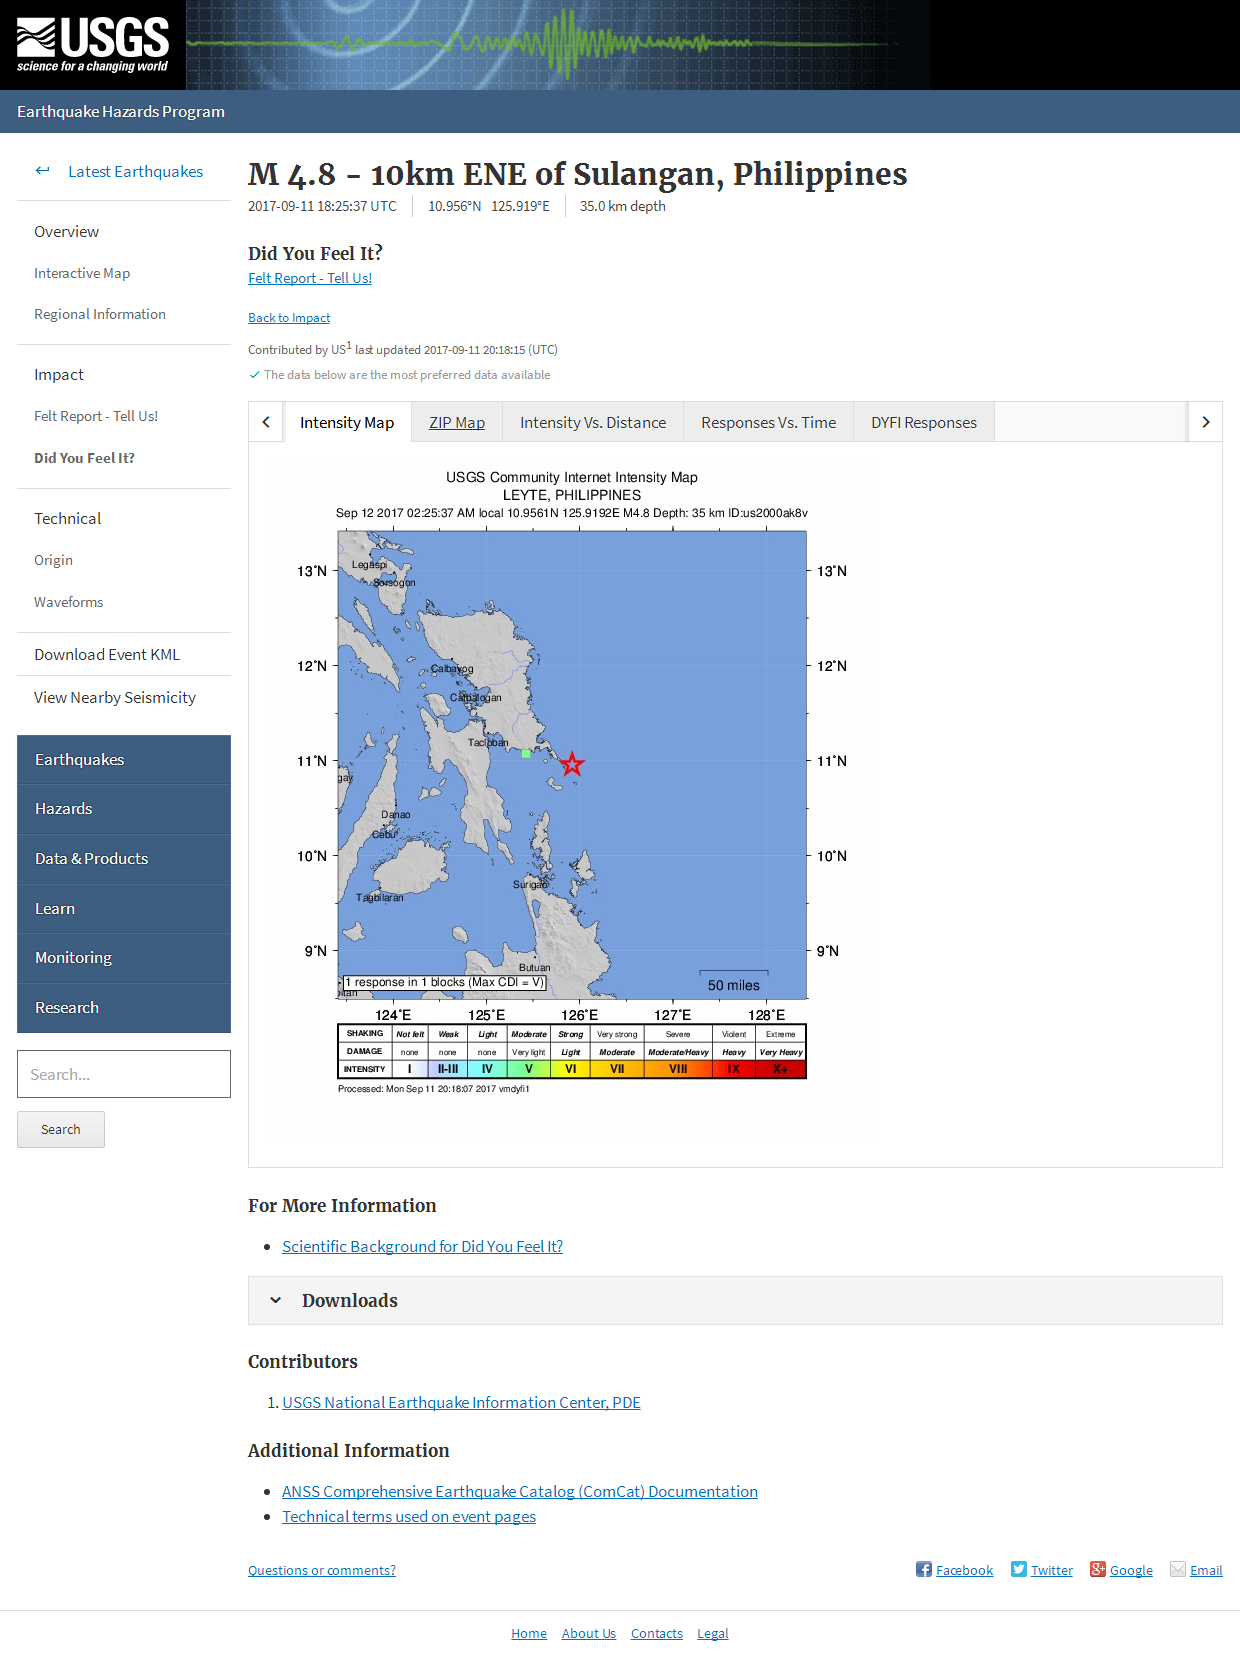 M 4.8 - 10km ENE of Sulangan, Philippines.png